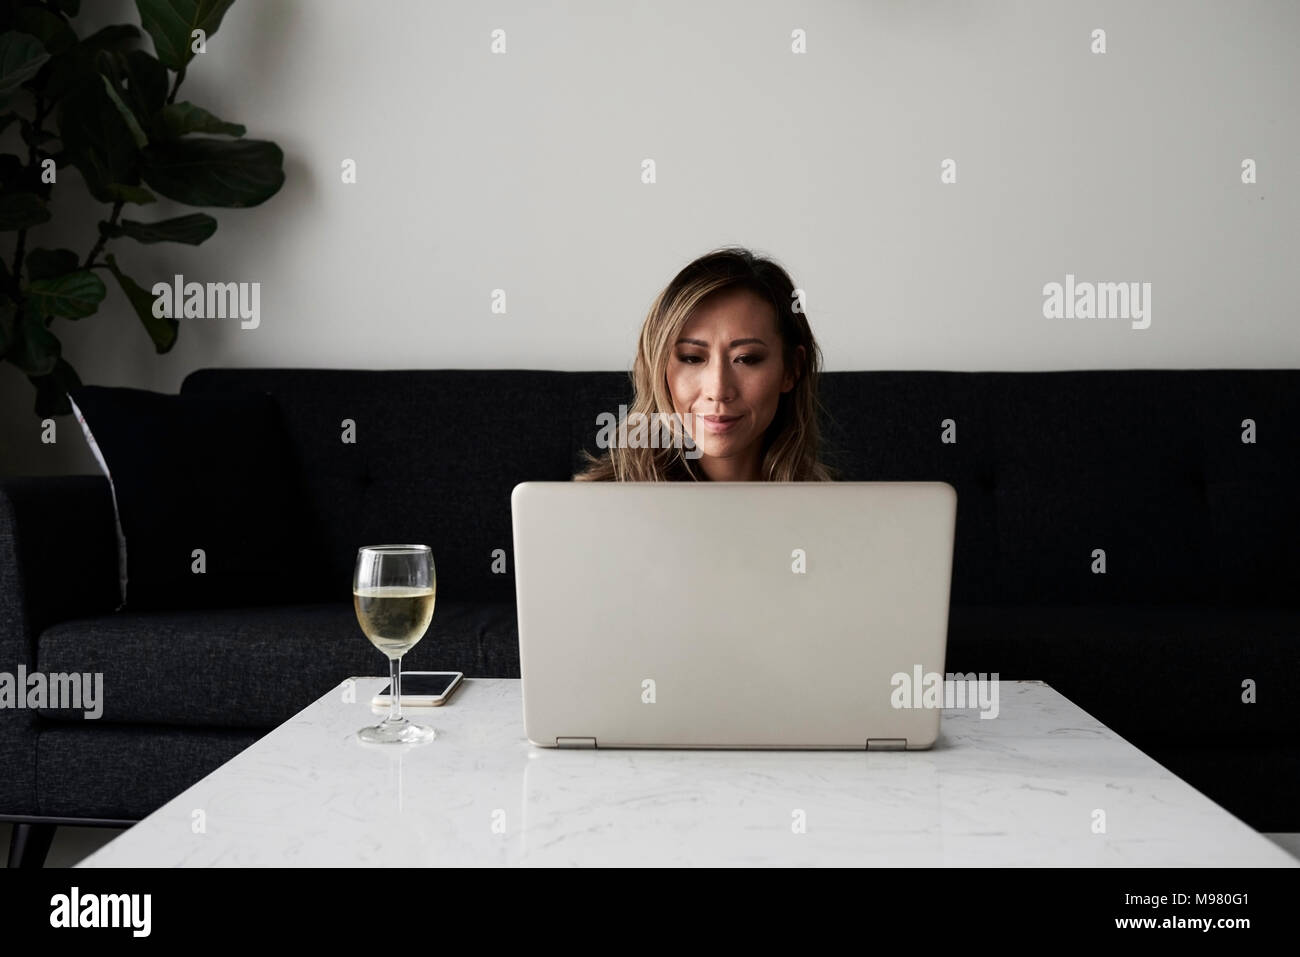 Pretty asian woman having a glass of wine while working with laptop at home. Stock Photo